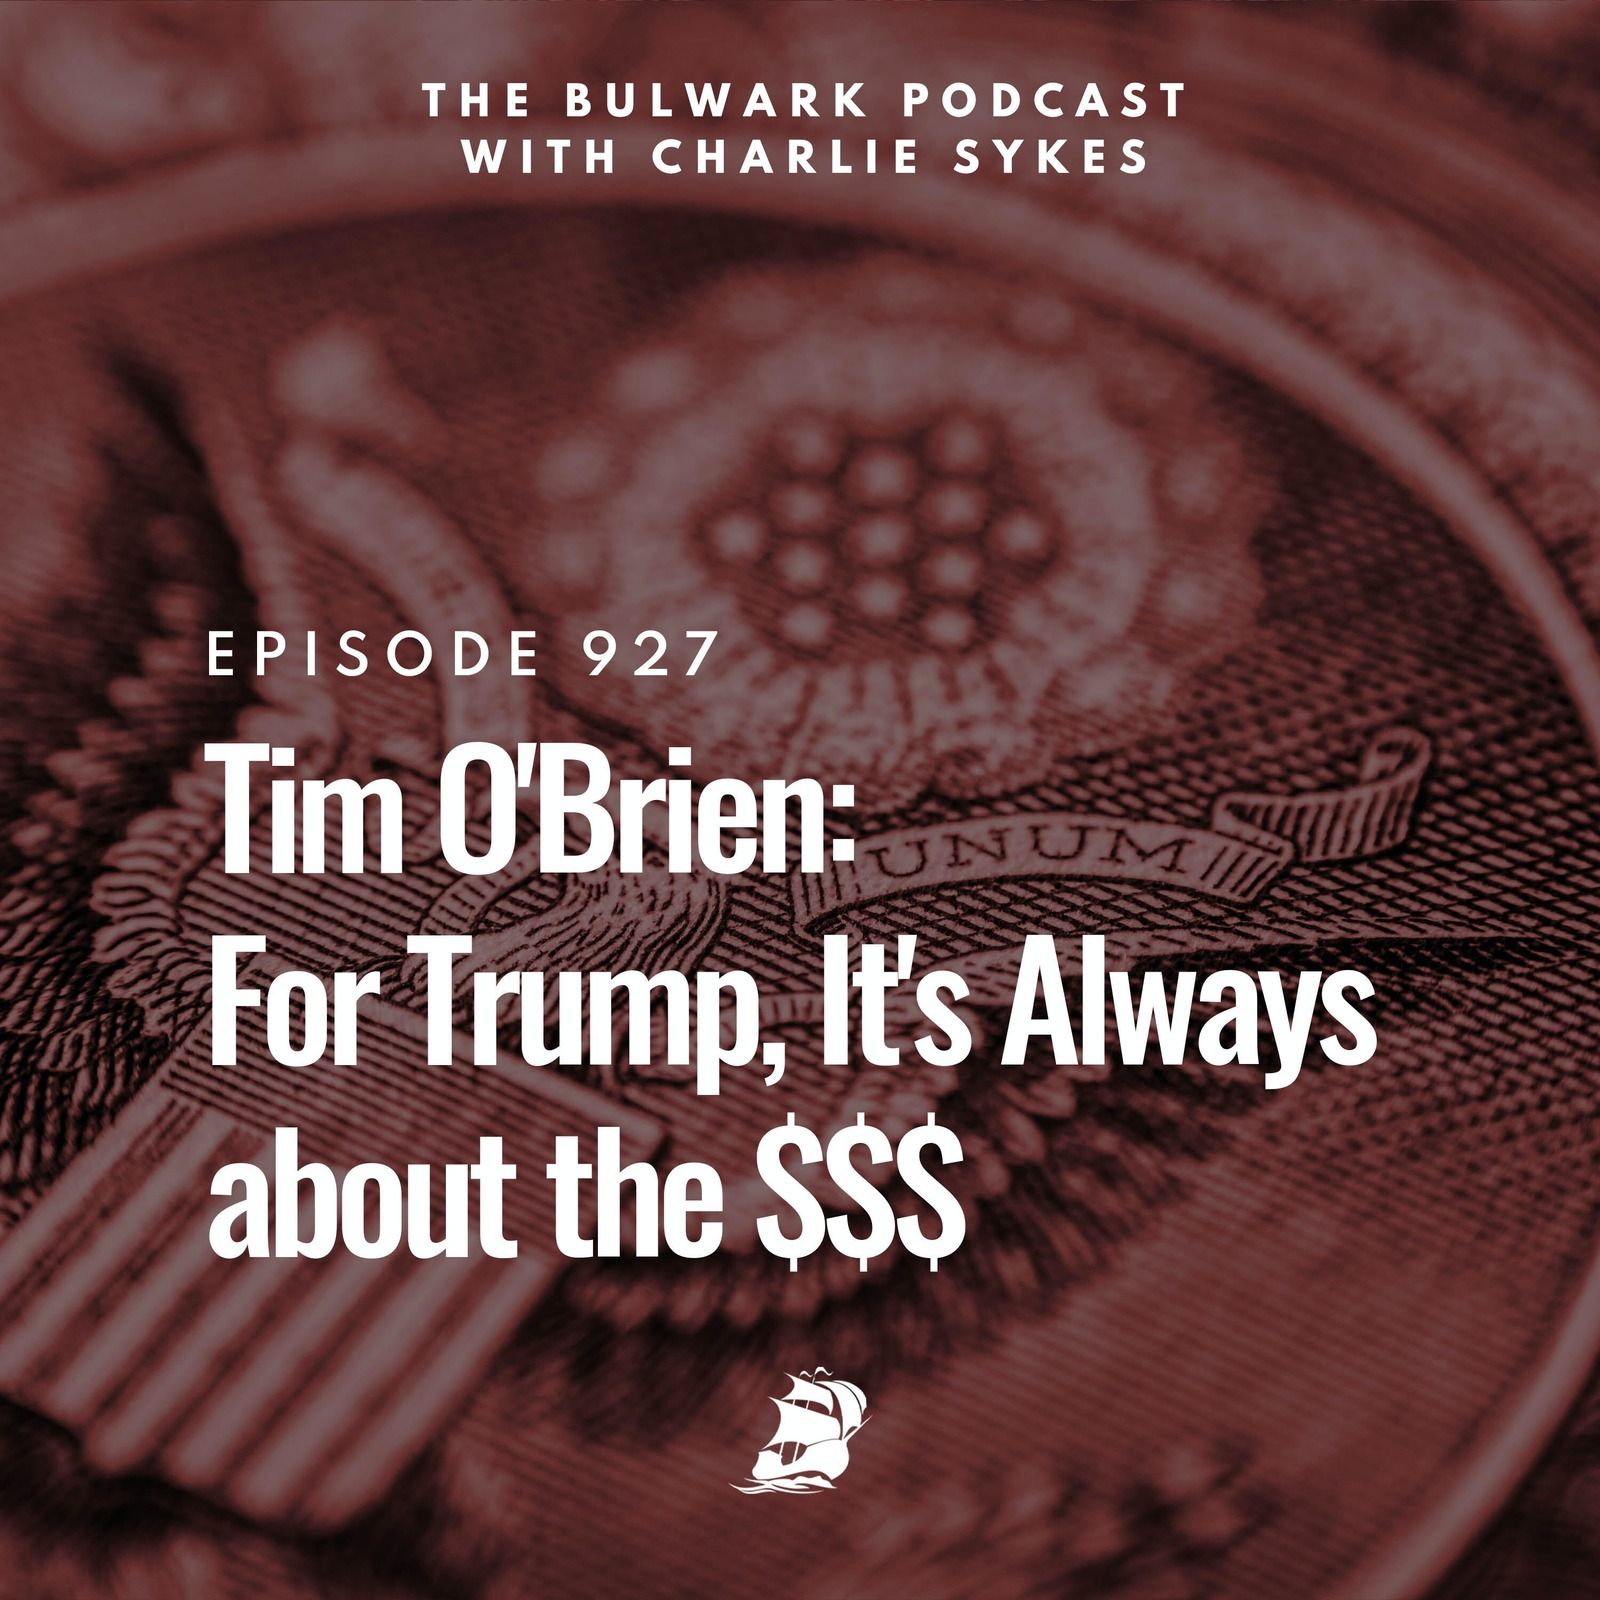 Tim O'Brien: For Trump, It's Always about the $$$ by The Bulwark Podcast